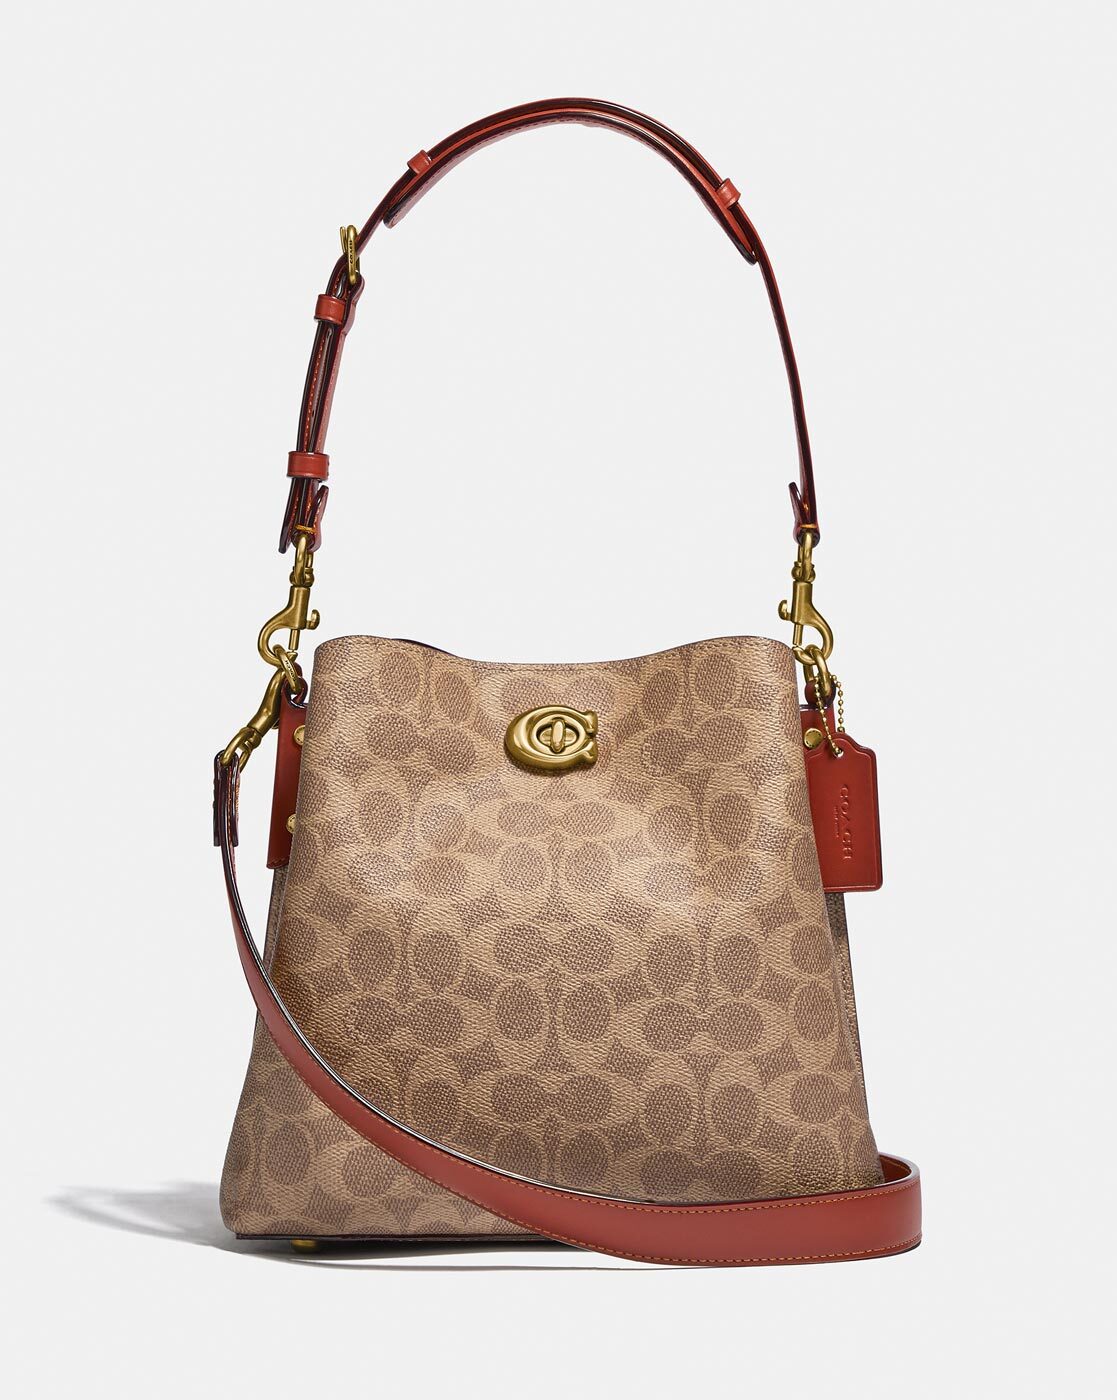 Coach handbags are up to 50% off for the holidays